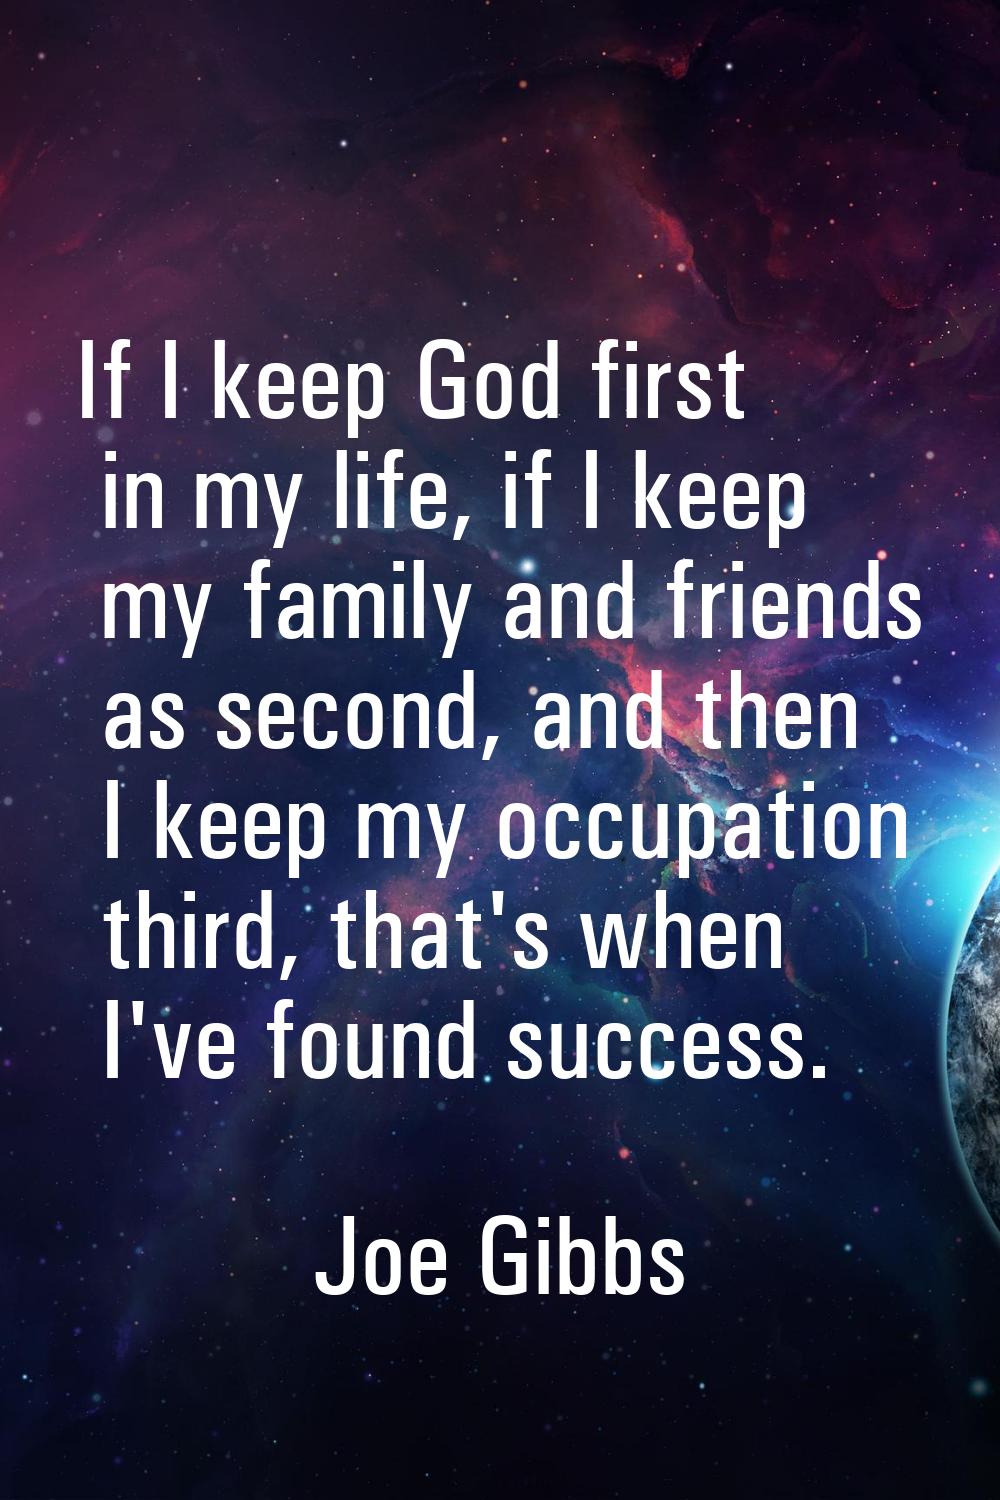 If I keep God first in my life, if I keep my family and friends as second, and then I keep my occup